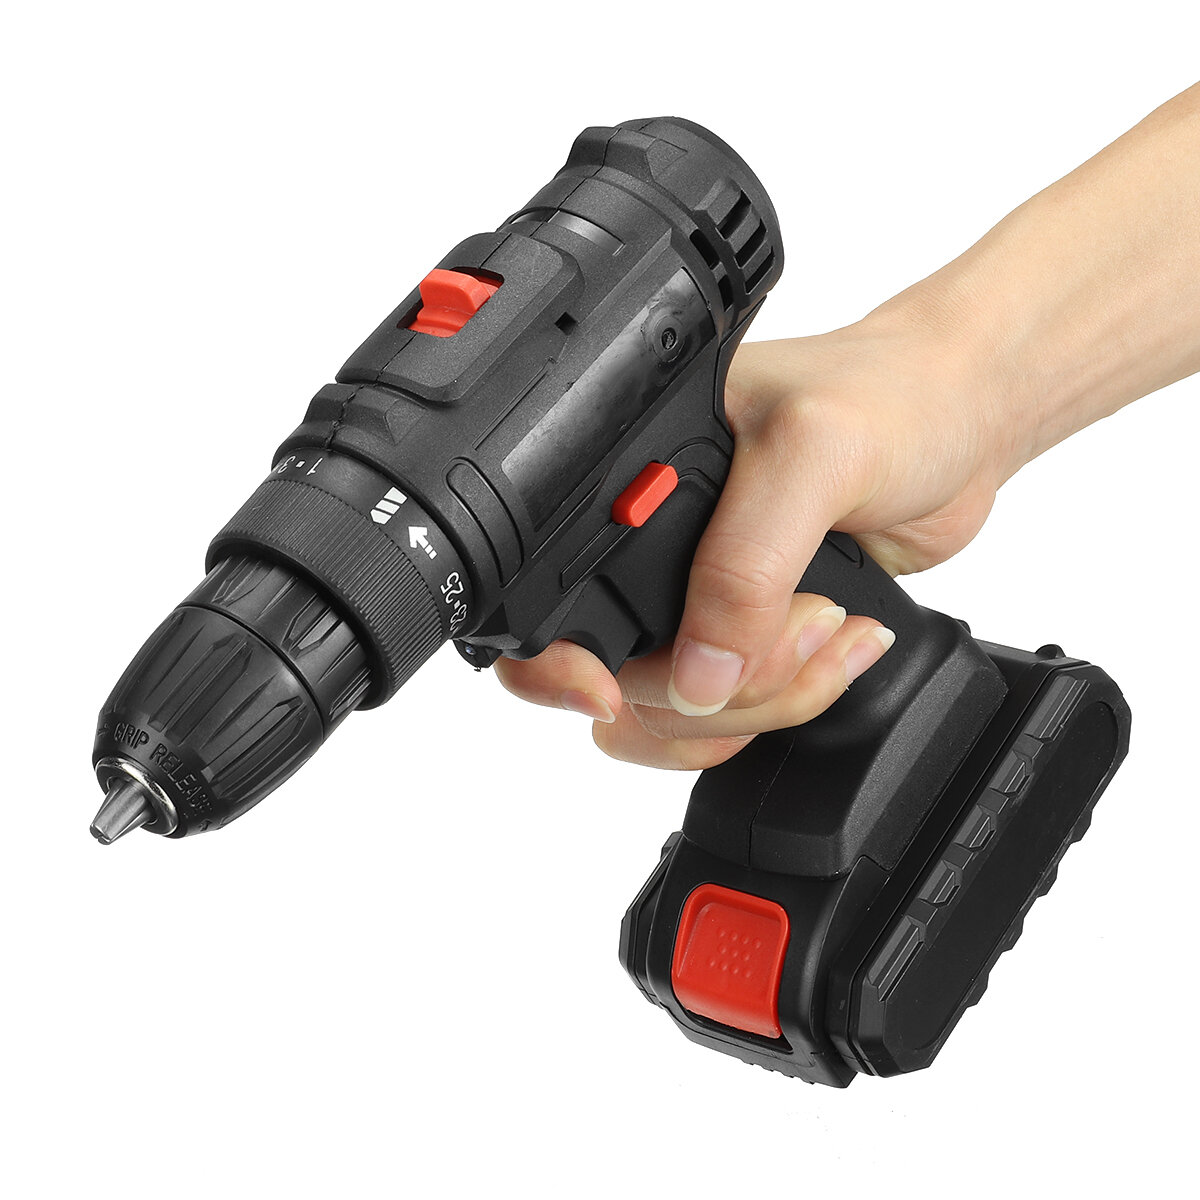 Image of 21V 2 Speed Household Lithium Battery Cordless Drill Driver Power Drill Electric Drill With Battery